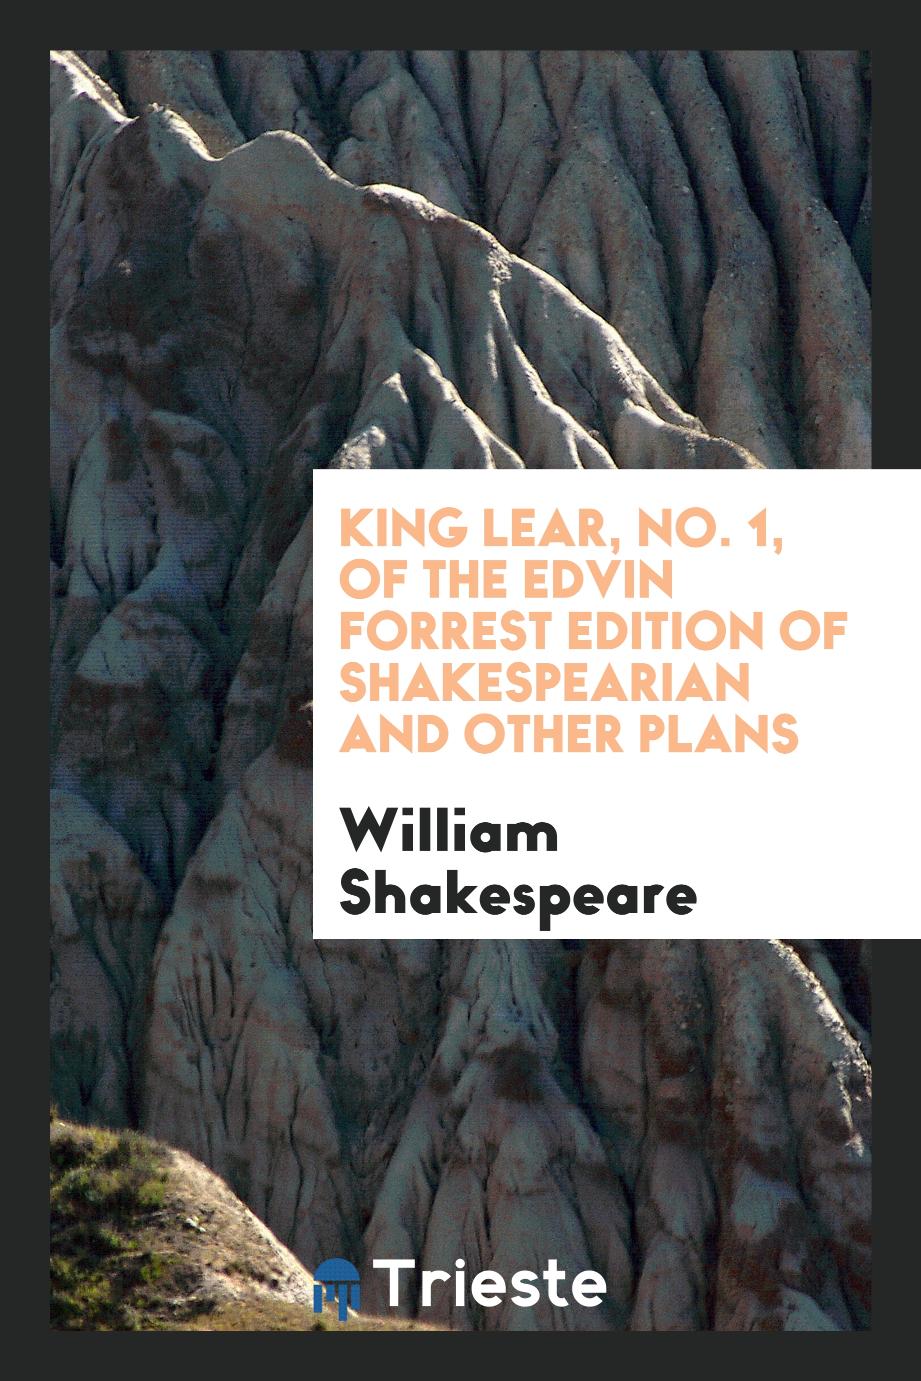 King Lear, No. 1, of the Edvin Forrest Edition of Shakespearian and other Plans